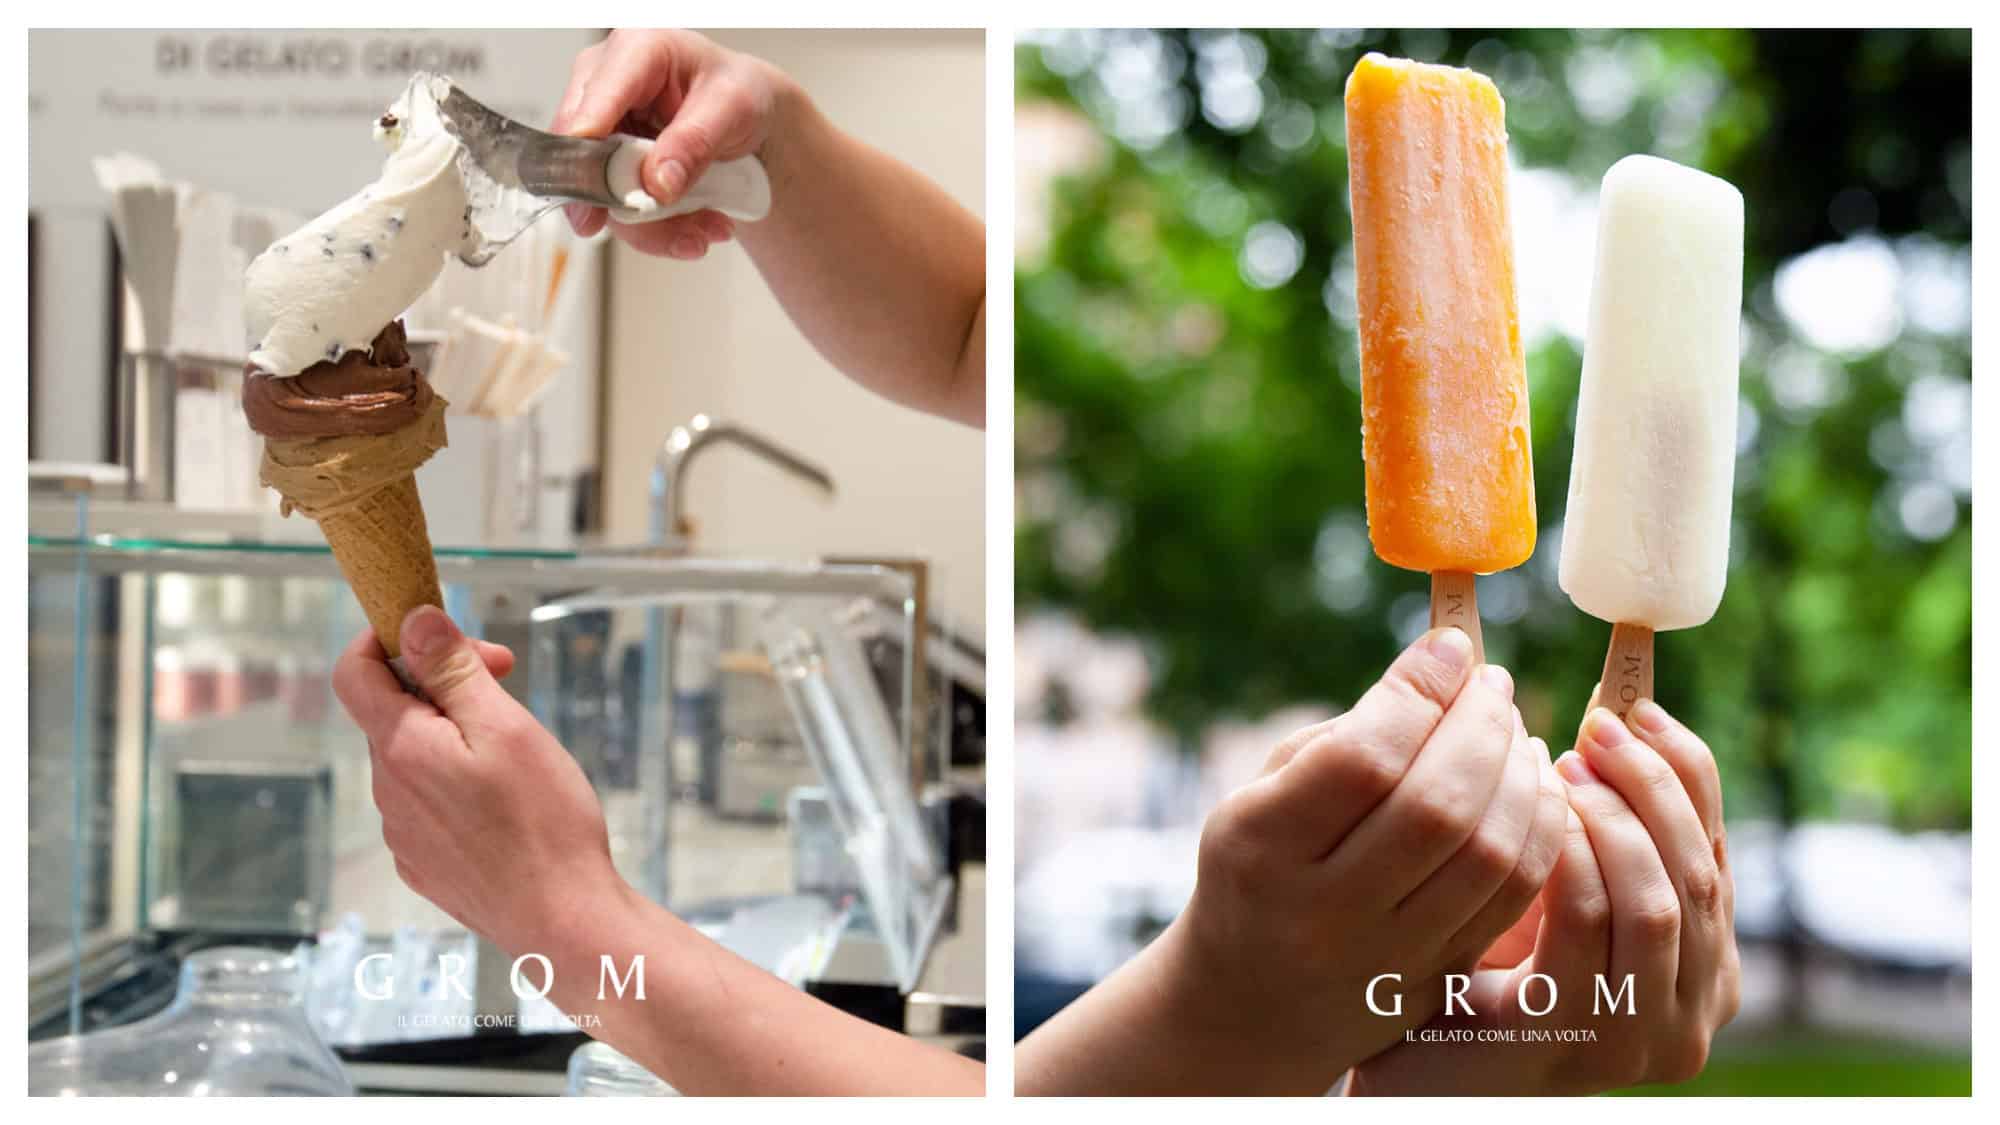 A cone ice cream being served up (left) and two ice lollies, one orange, one white (right) at GROM.